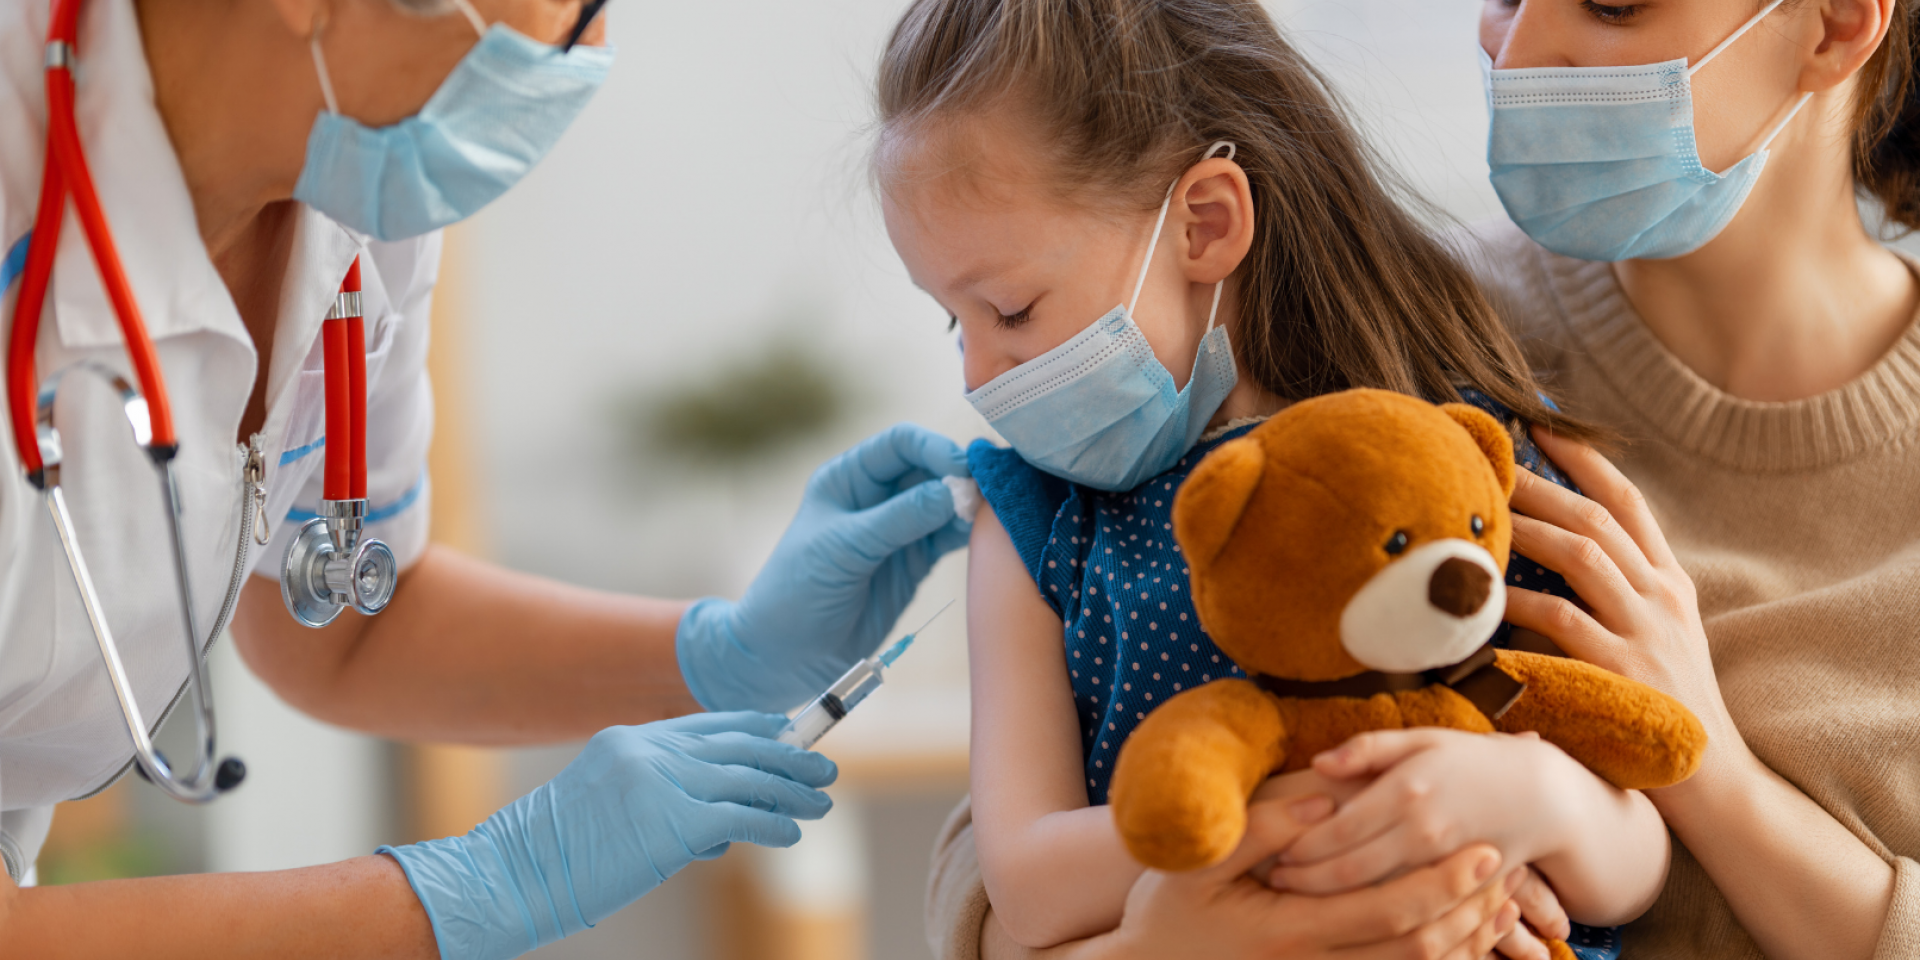 A child holds a stuffed bear while they are being vaccinated by a nurse.